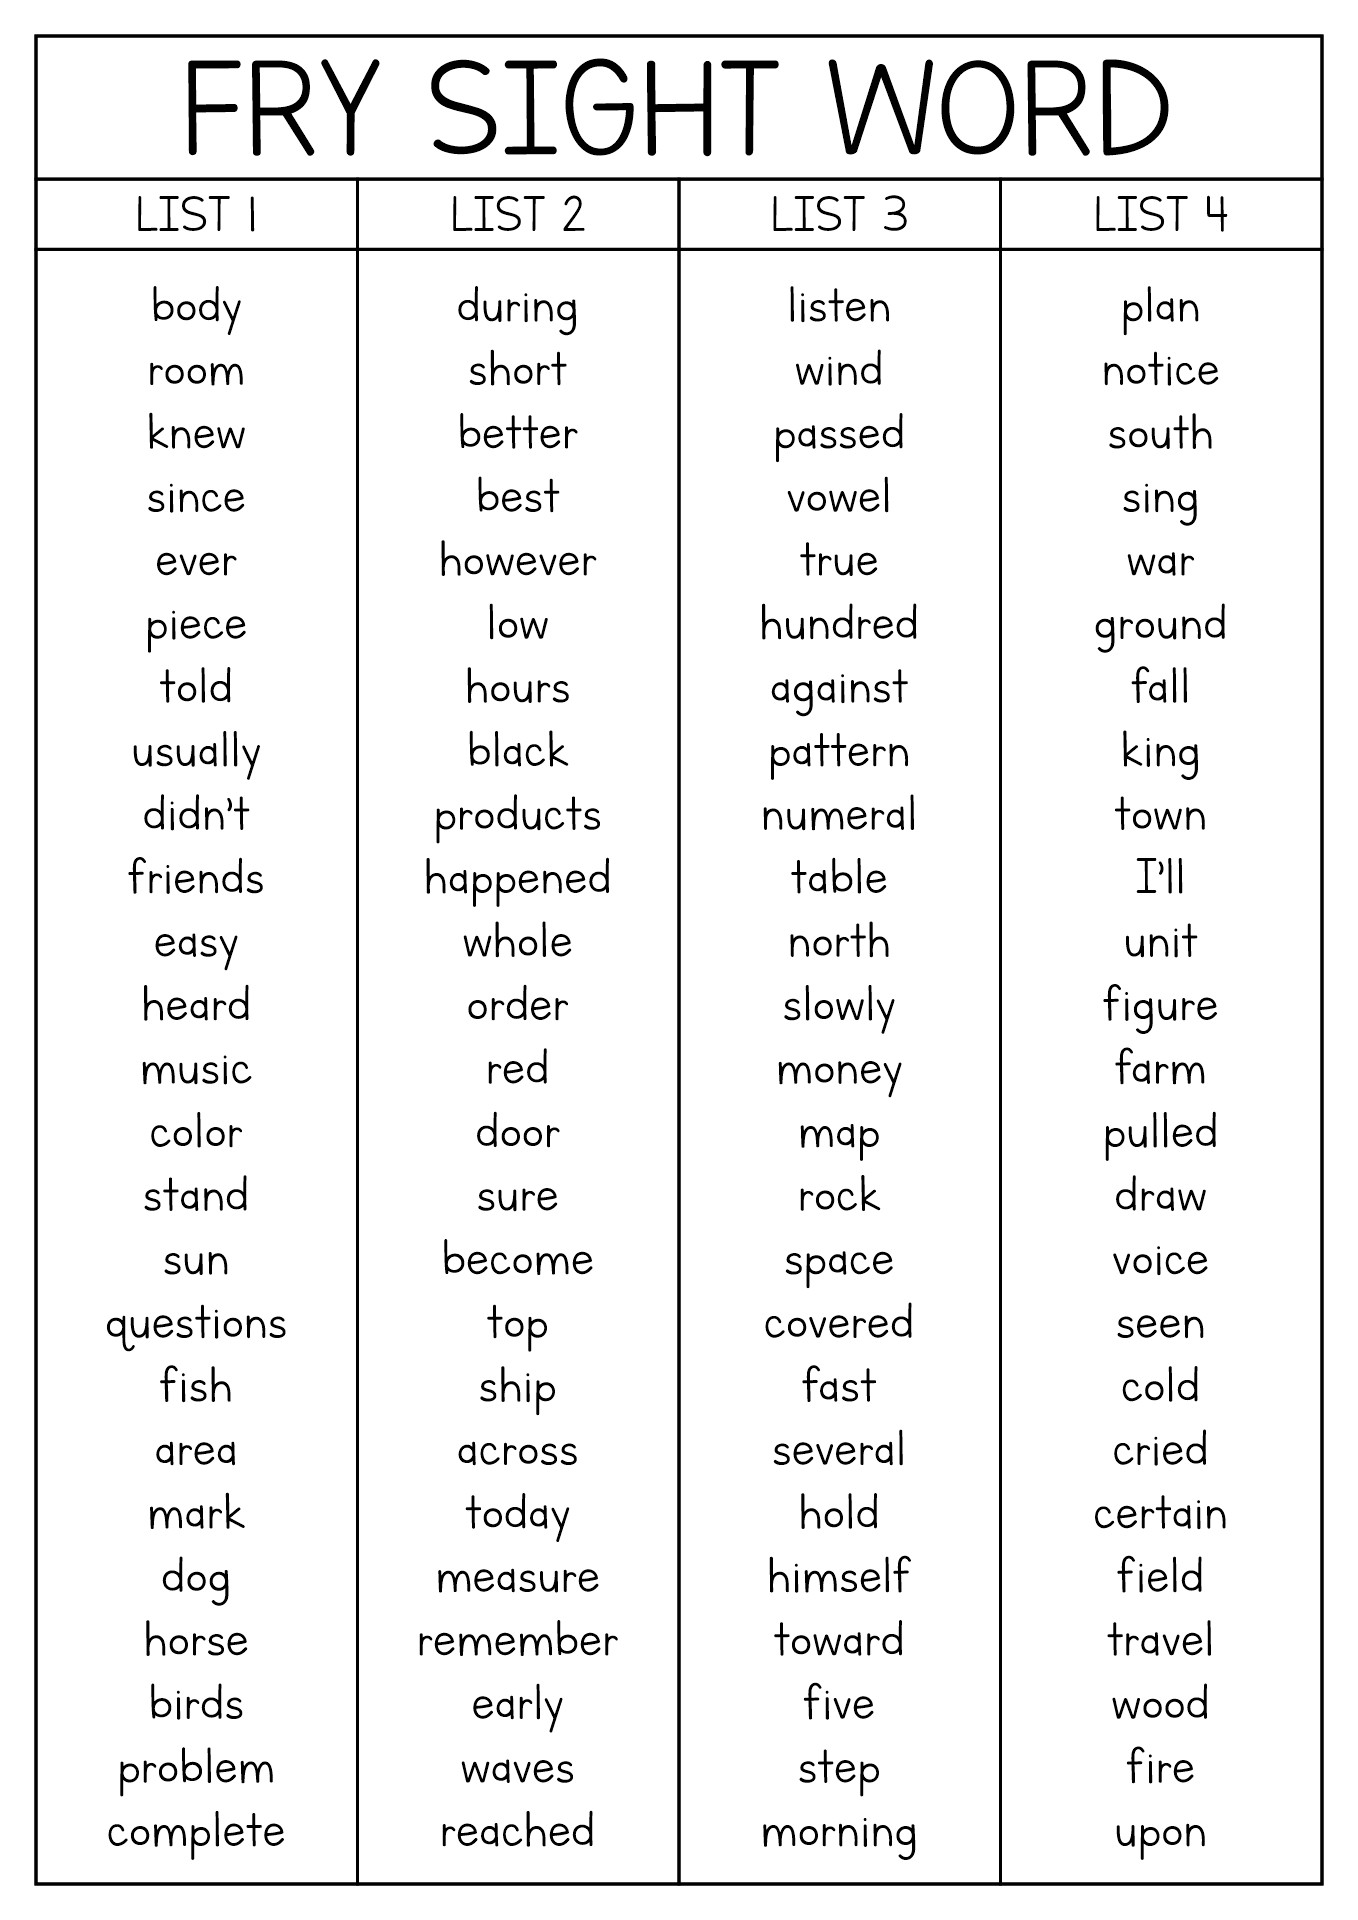 19-best-images-of-fry-s-first-100-words-worksheets-100-fry-sight-word-worksheet-fry-first-100